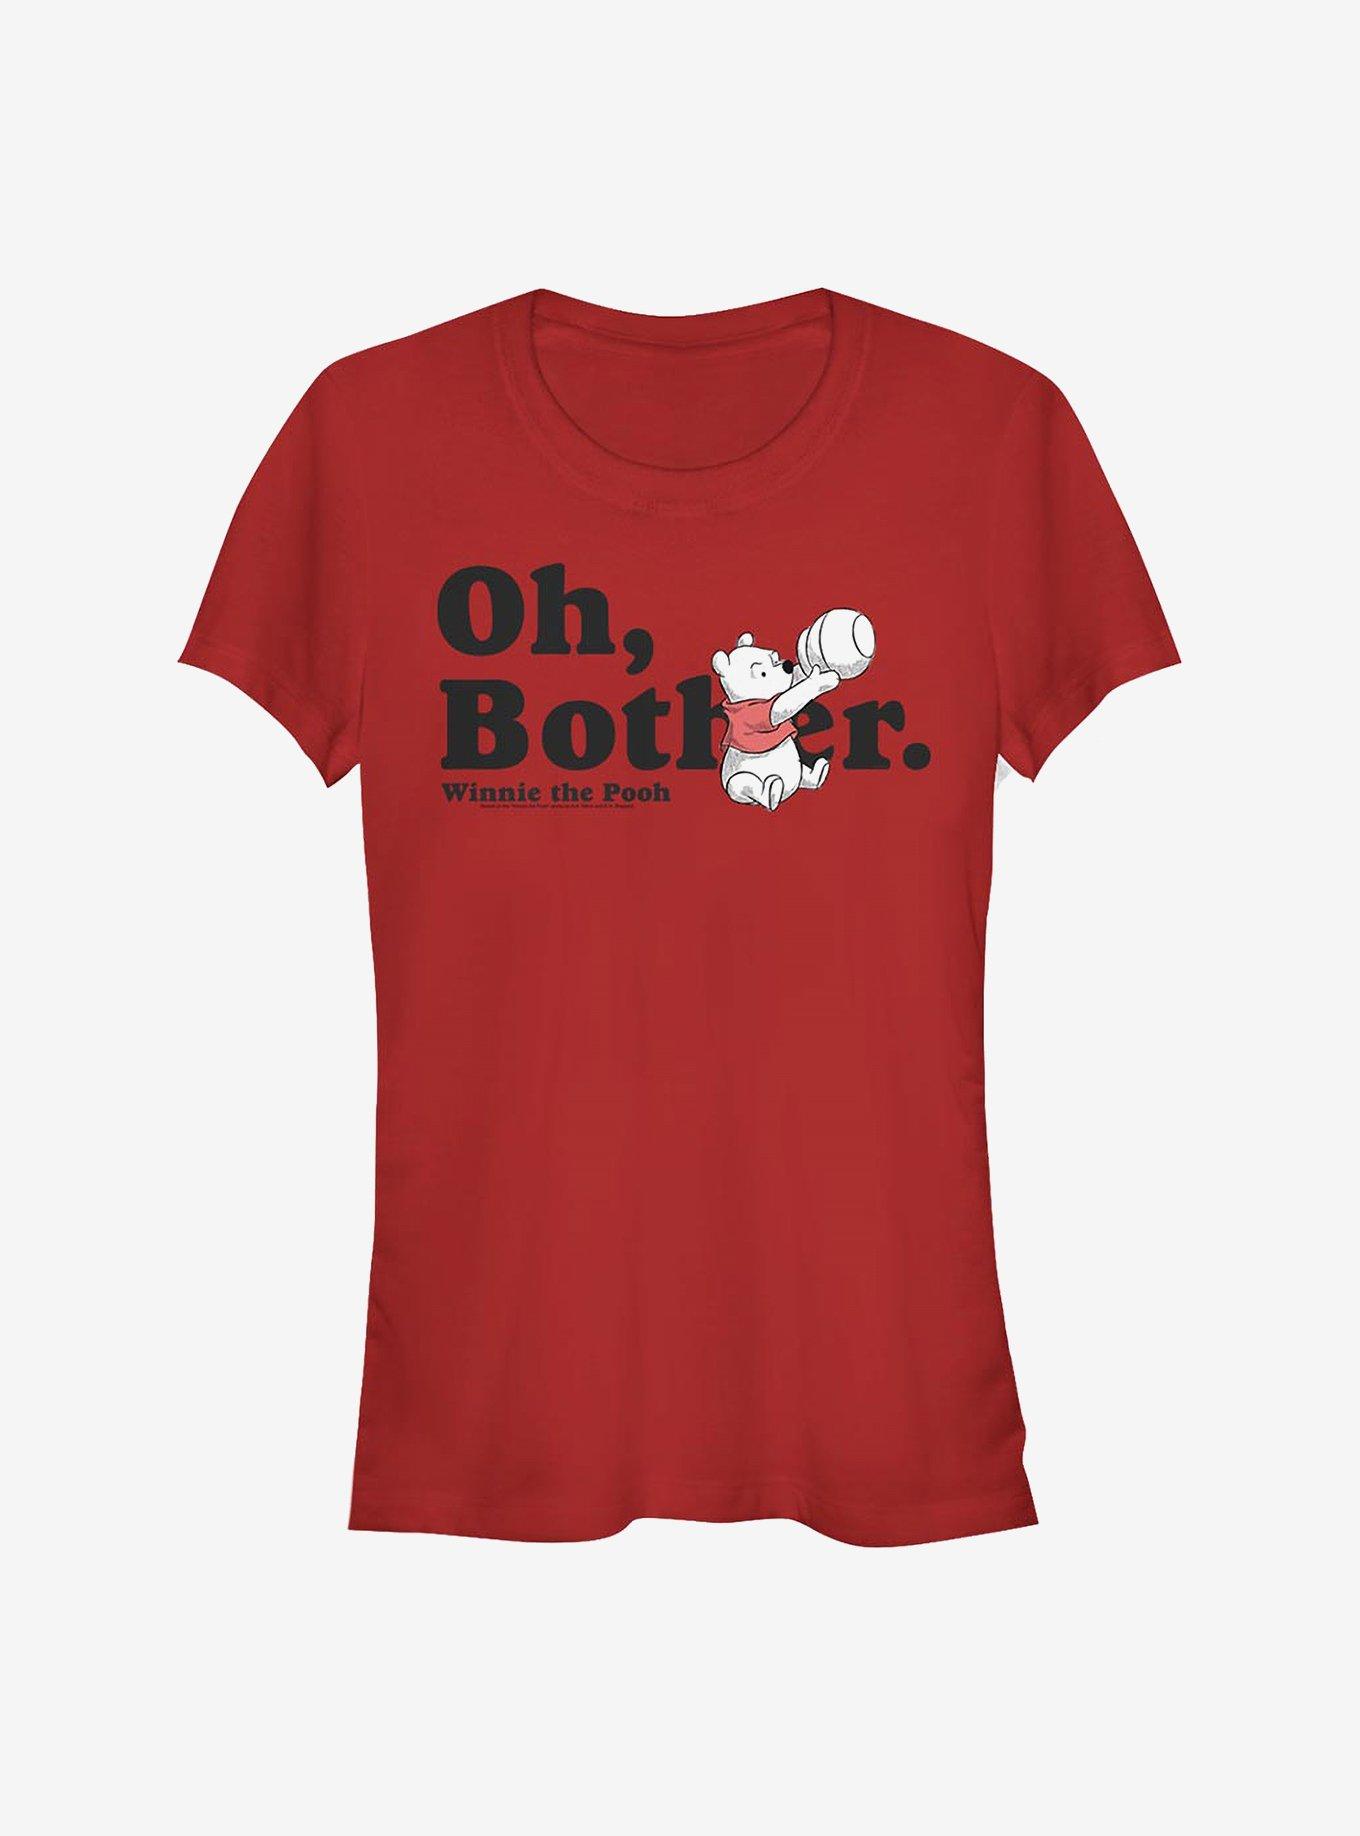 Disney Winnie The Pooh More Bothers Girls T-Shirt, RED, hi-res